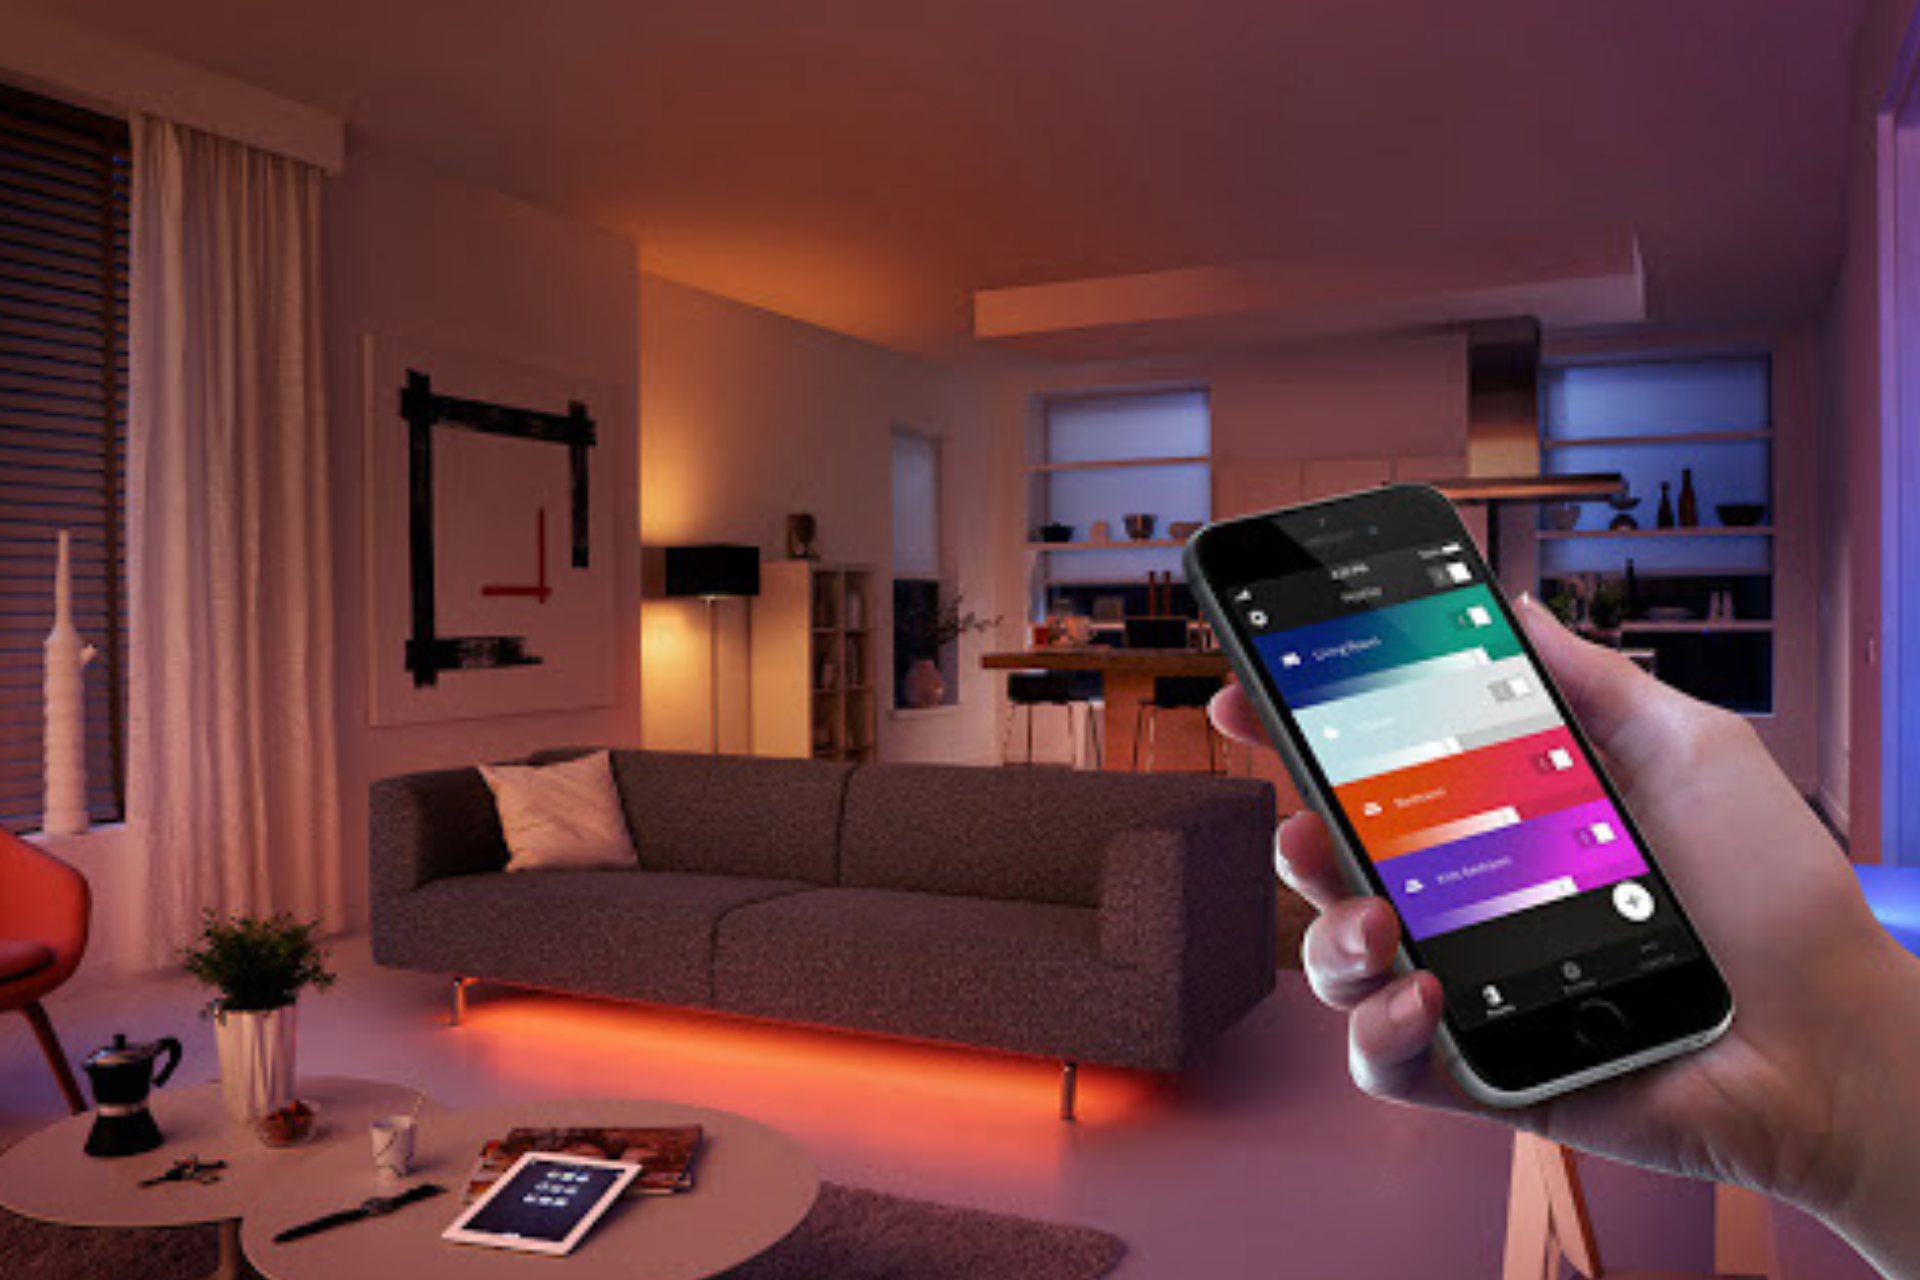 Future of Smart Lighting - Spintly